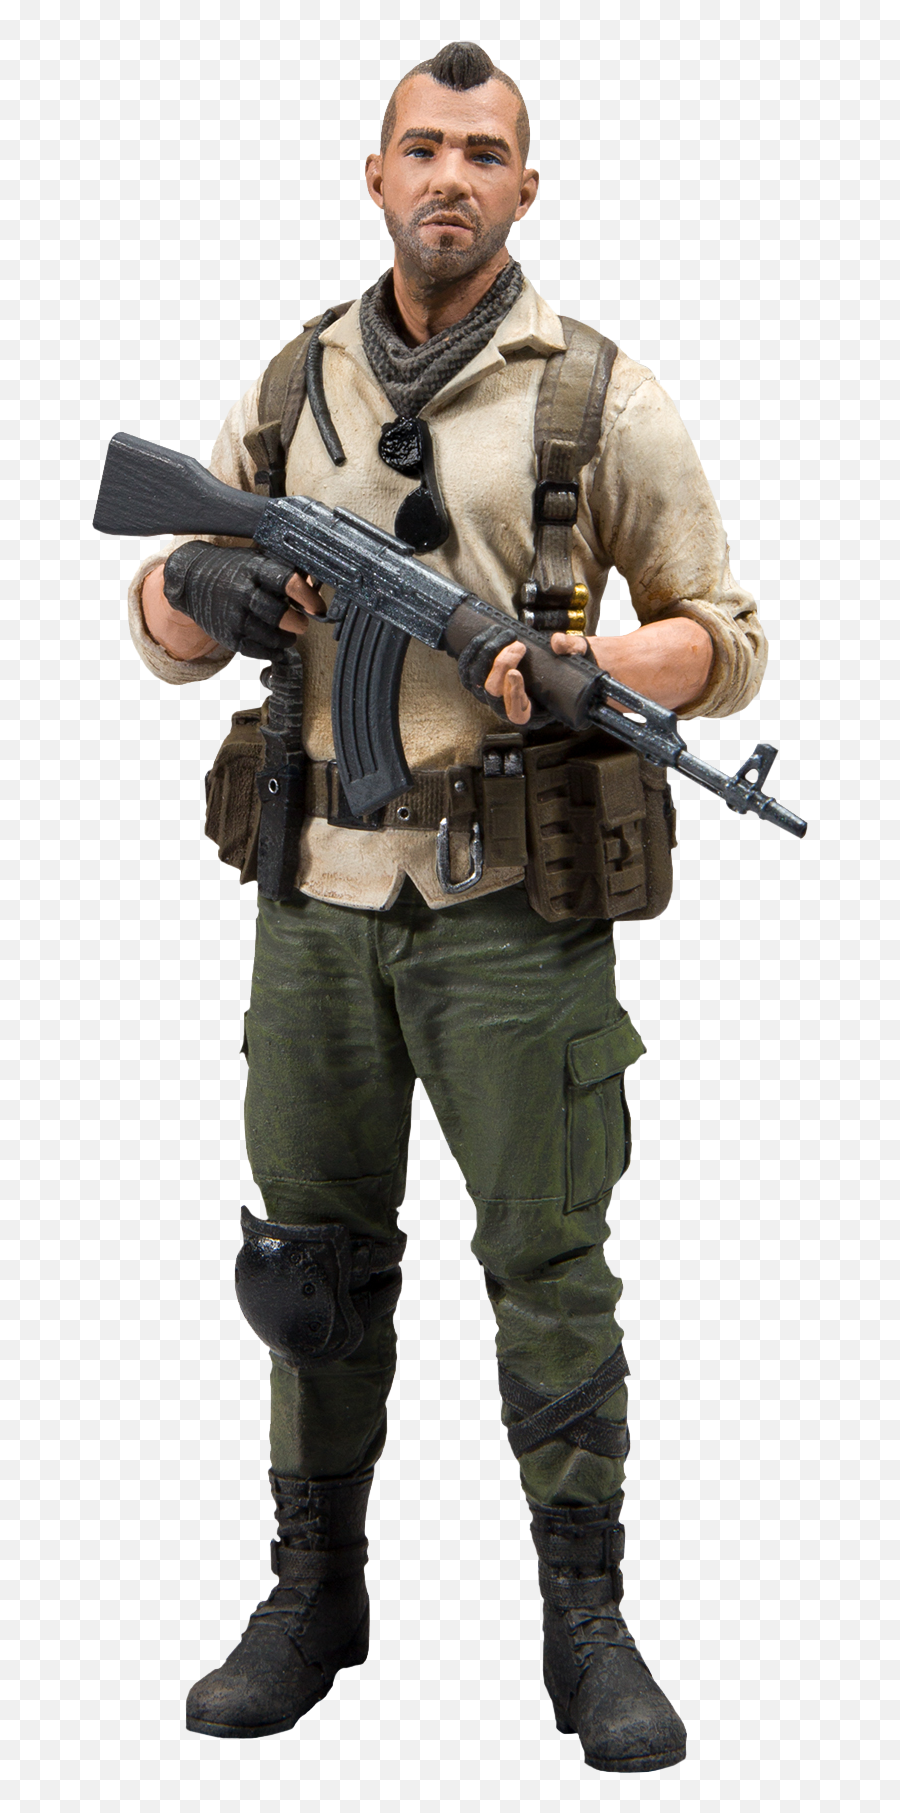 Call Of Duty Characters - Mcfarlane Call Of Duty Figures Call Of Duty Figures Png,Call Of Duty Soldier Png